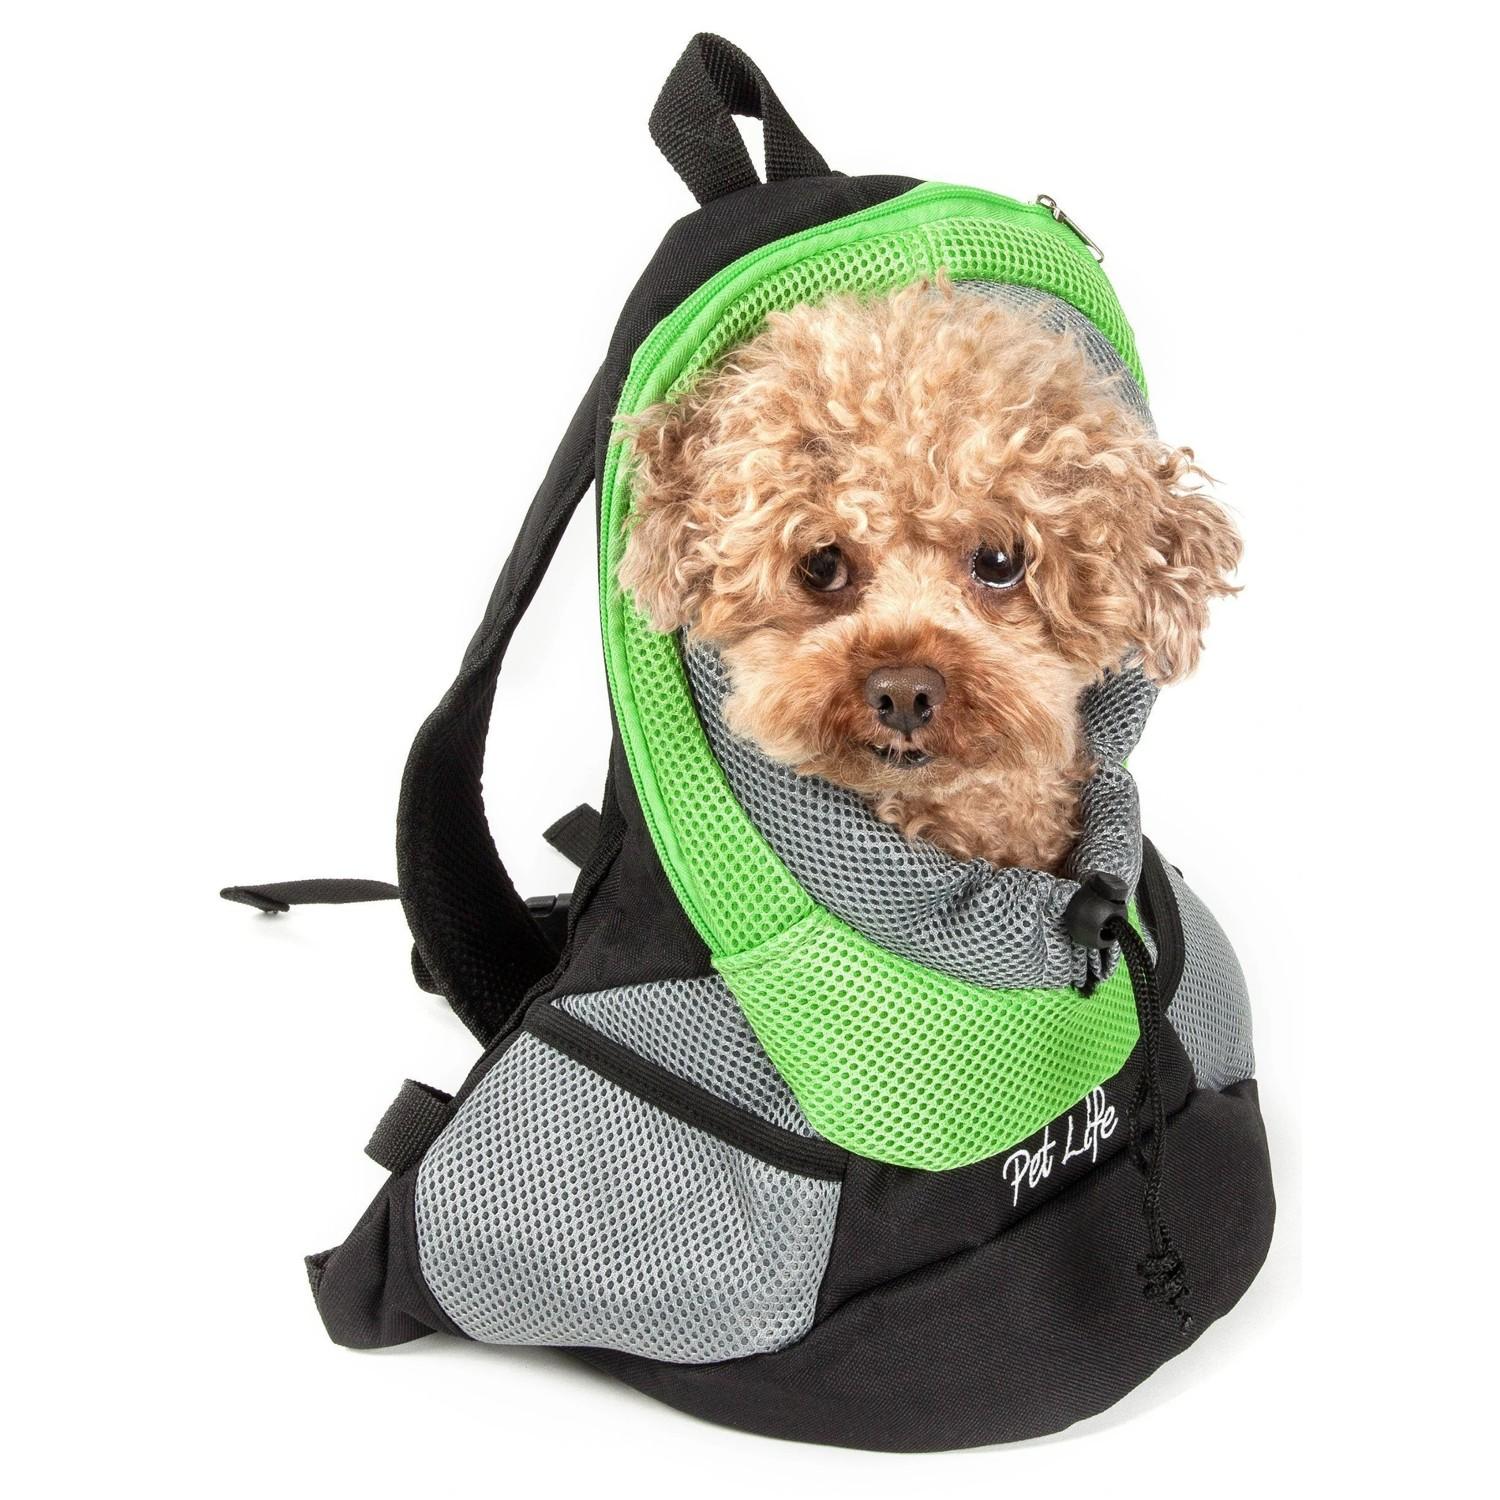 Baxter & Bella Small Soft Pet Carrier 16x8x11.5 in